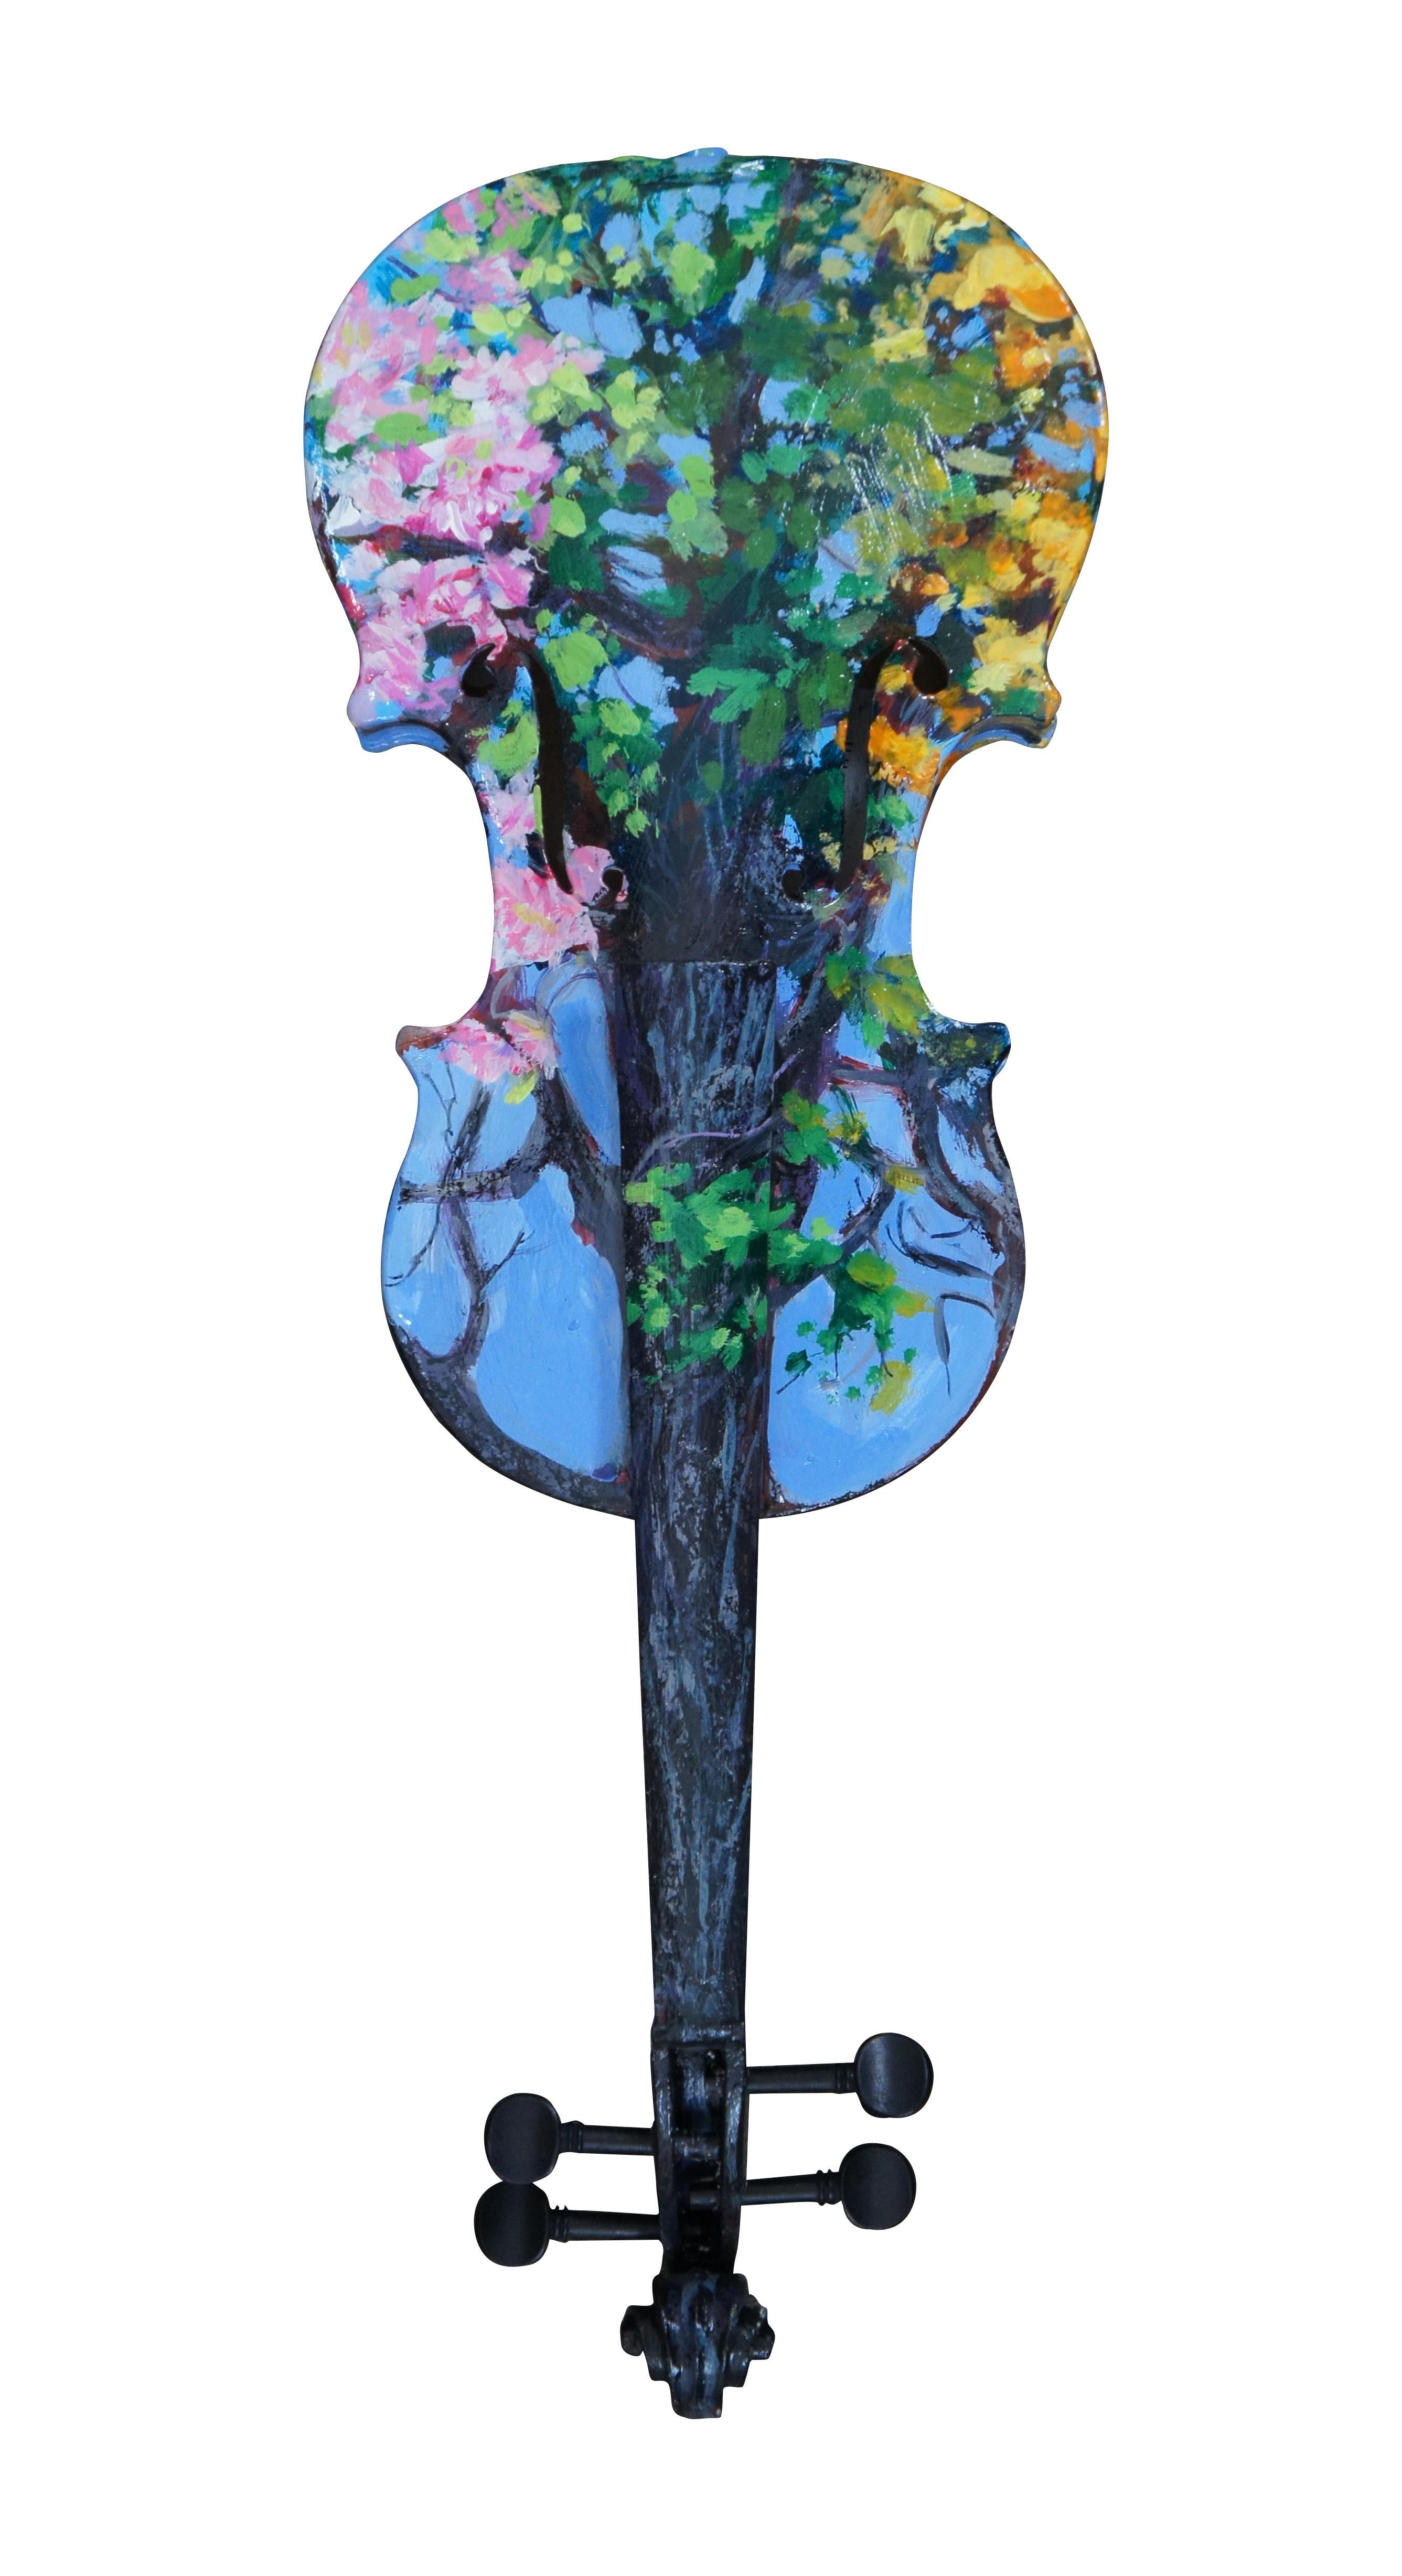 Three dimensional sculpture / mobile artwork by Susan Lucas titled “Four Seasons.” All sides of a re-purposed violin act as the canvas for an Impressionist style tree as it passes through the four seasons – the pink blossoms of spring, the deep